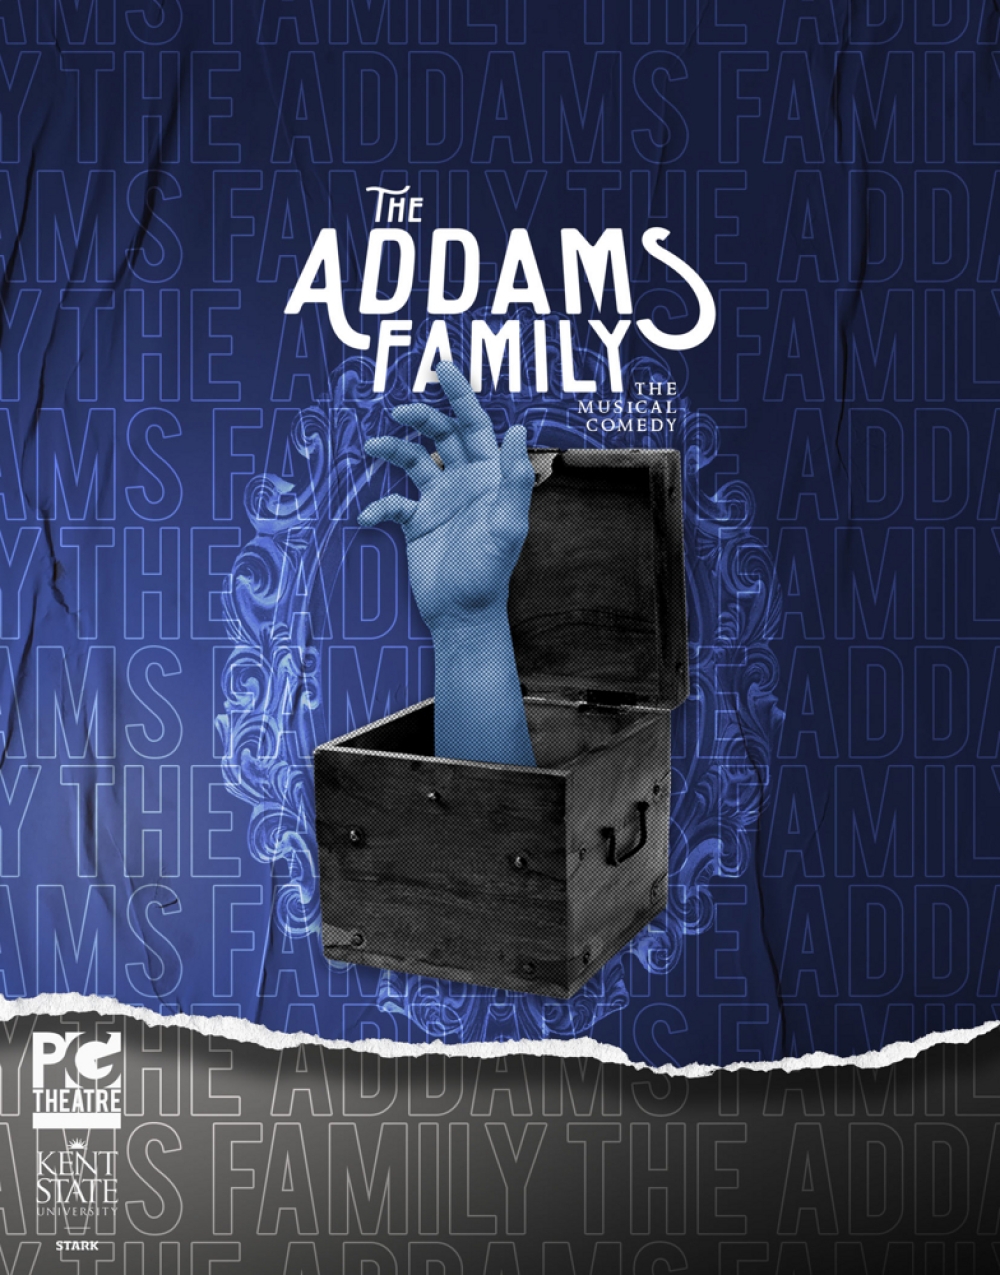 THE ADDAMS FAMILY THE MUSICAL COMEDY at The Players Guild Theatre